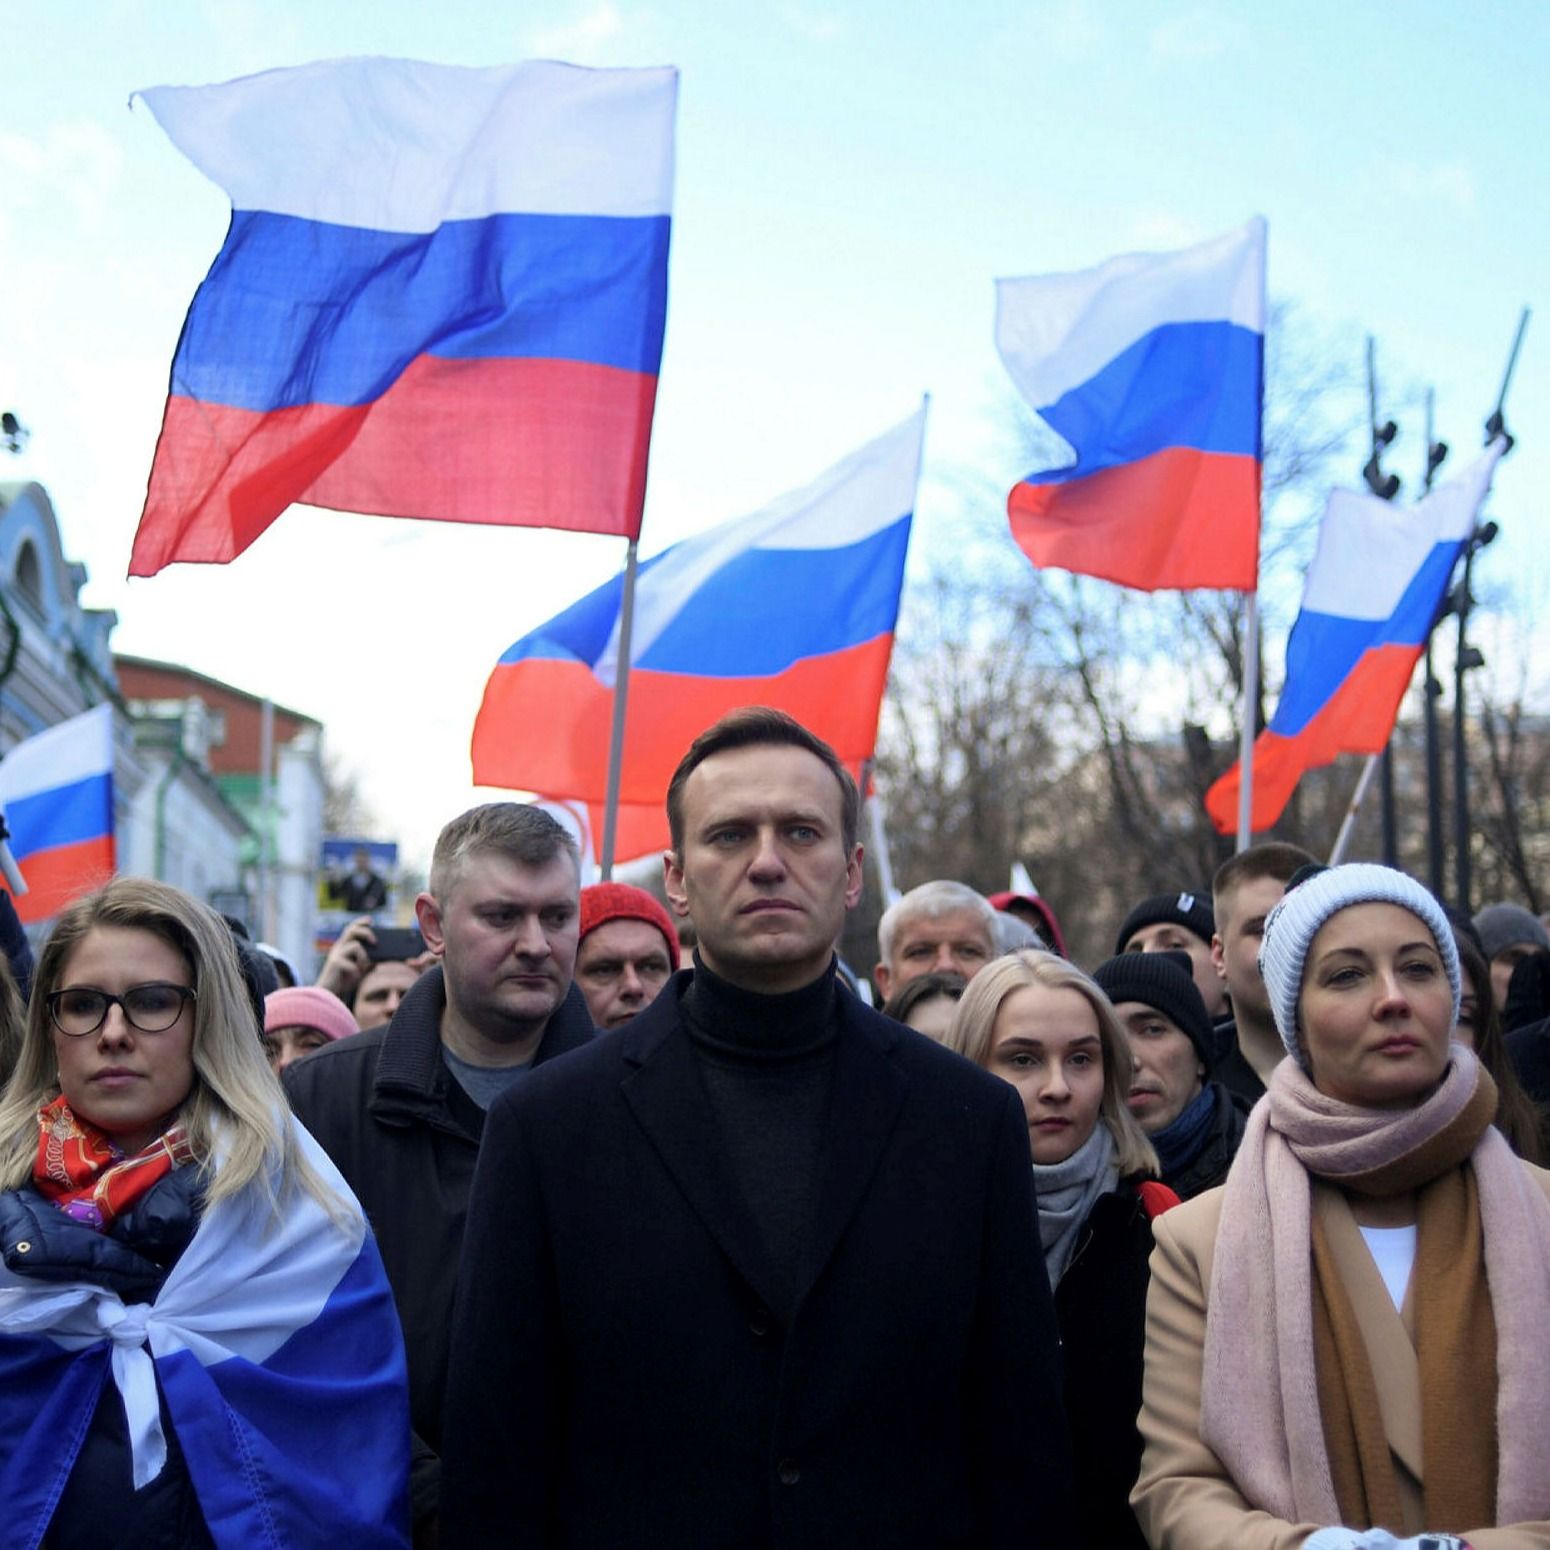 Navalny, his wife Yulia, opposition politician Lyubov Sobol and other demonstrators march in Moscow in February 2020